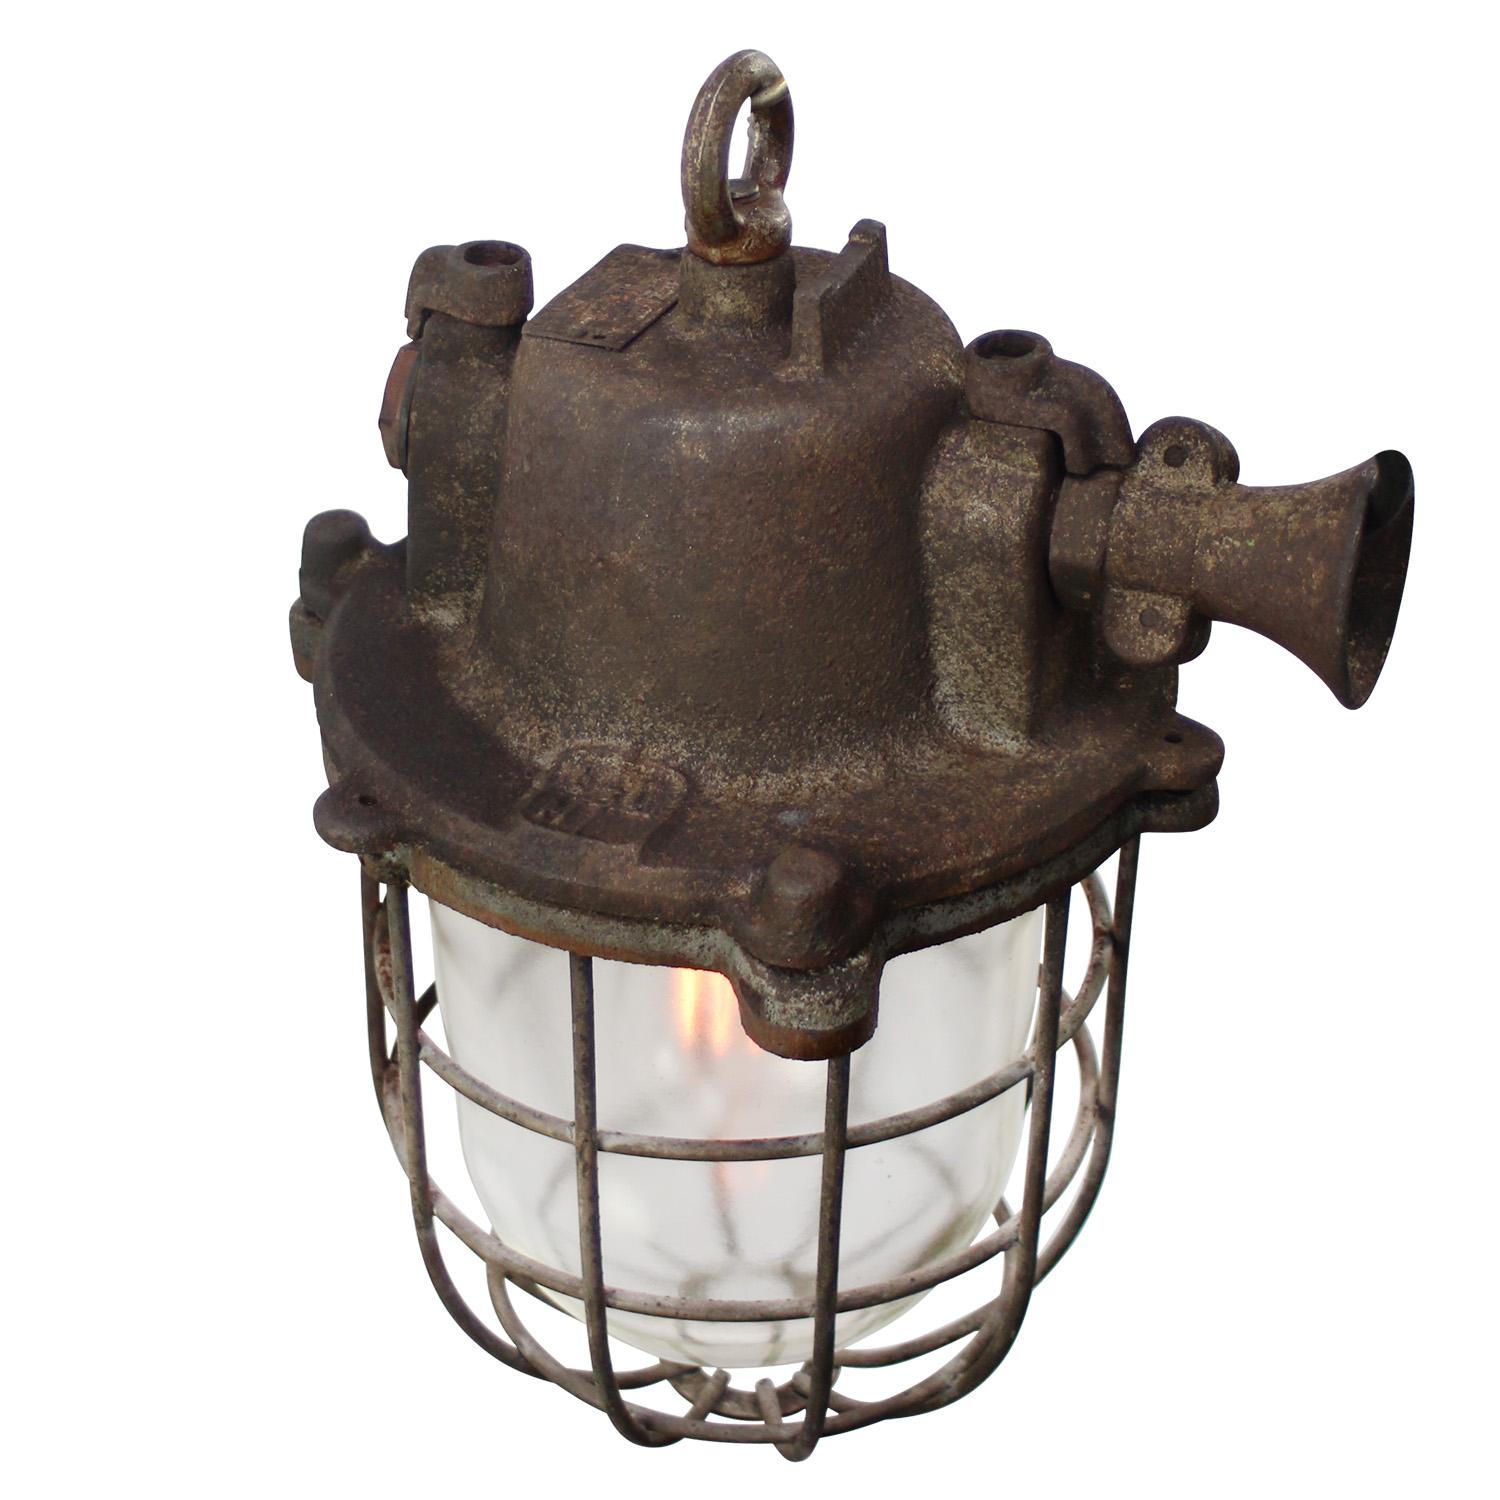 Industrial pendant lamp
Cast iron, clear glass

Weight 7.00 kg / 15.4 lb

Priced per individual item. All lamps have been made suitable by international standards for incandescent light bulbs, energy-efficient and LED bulbs. E26/E27 bulb holders and